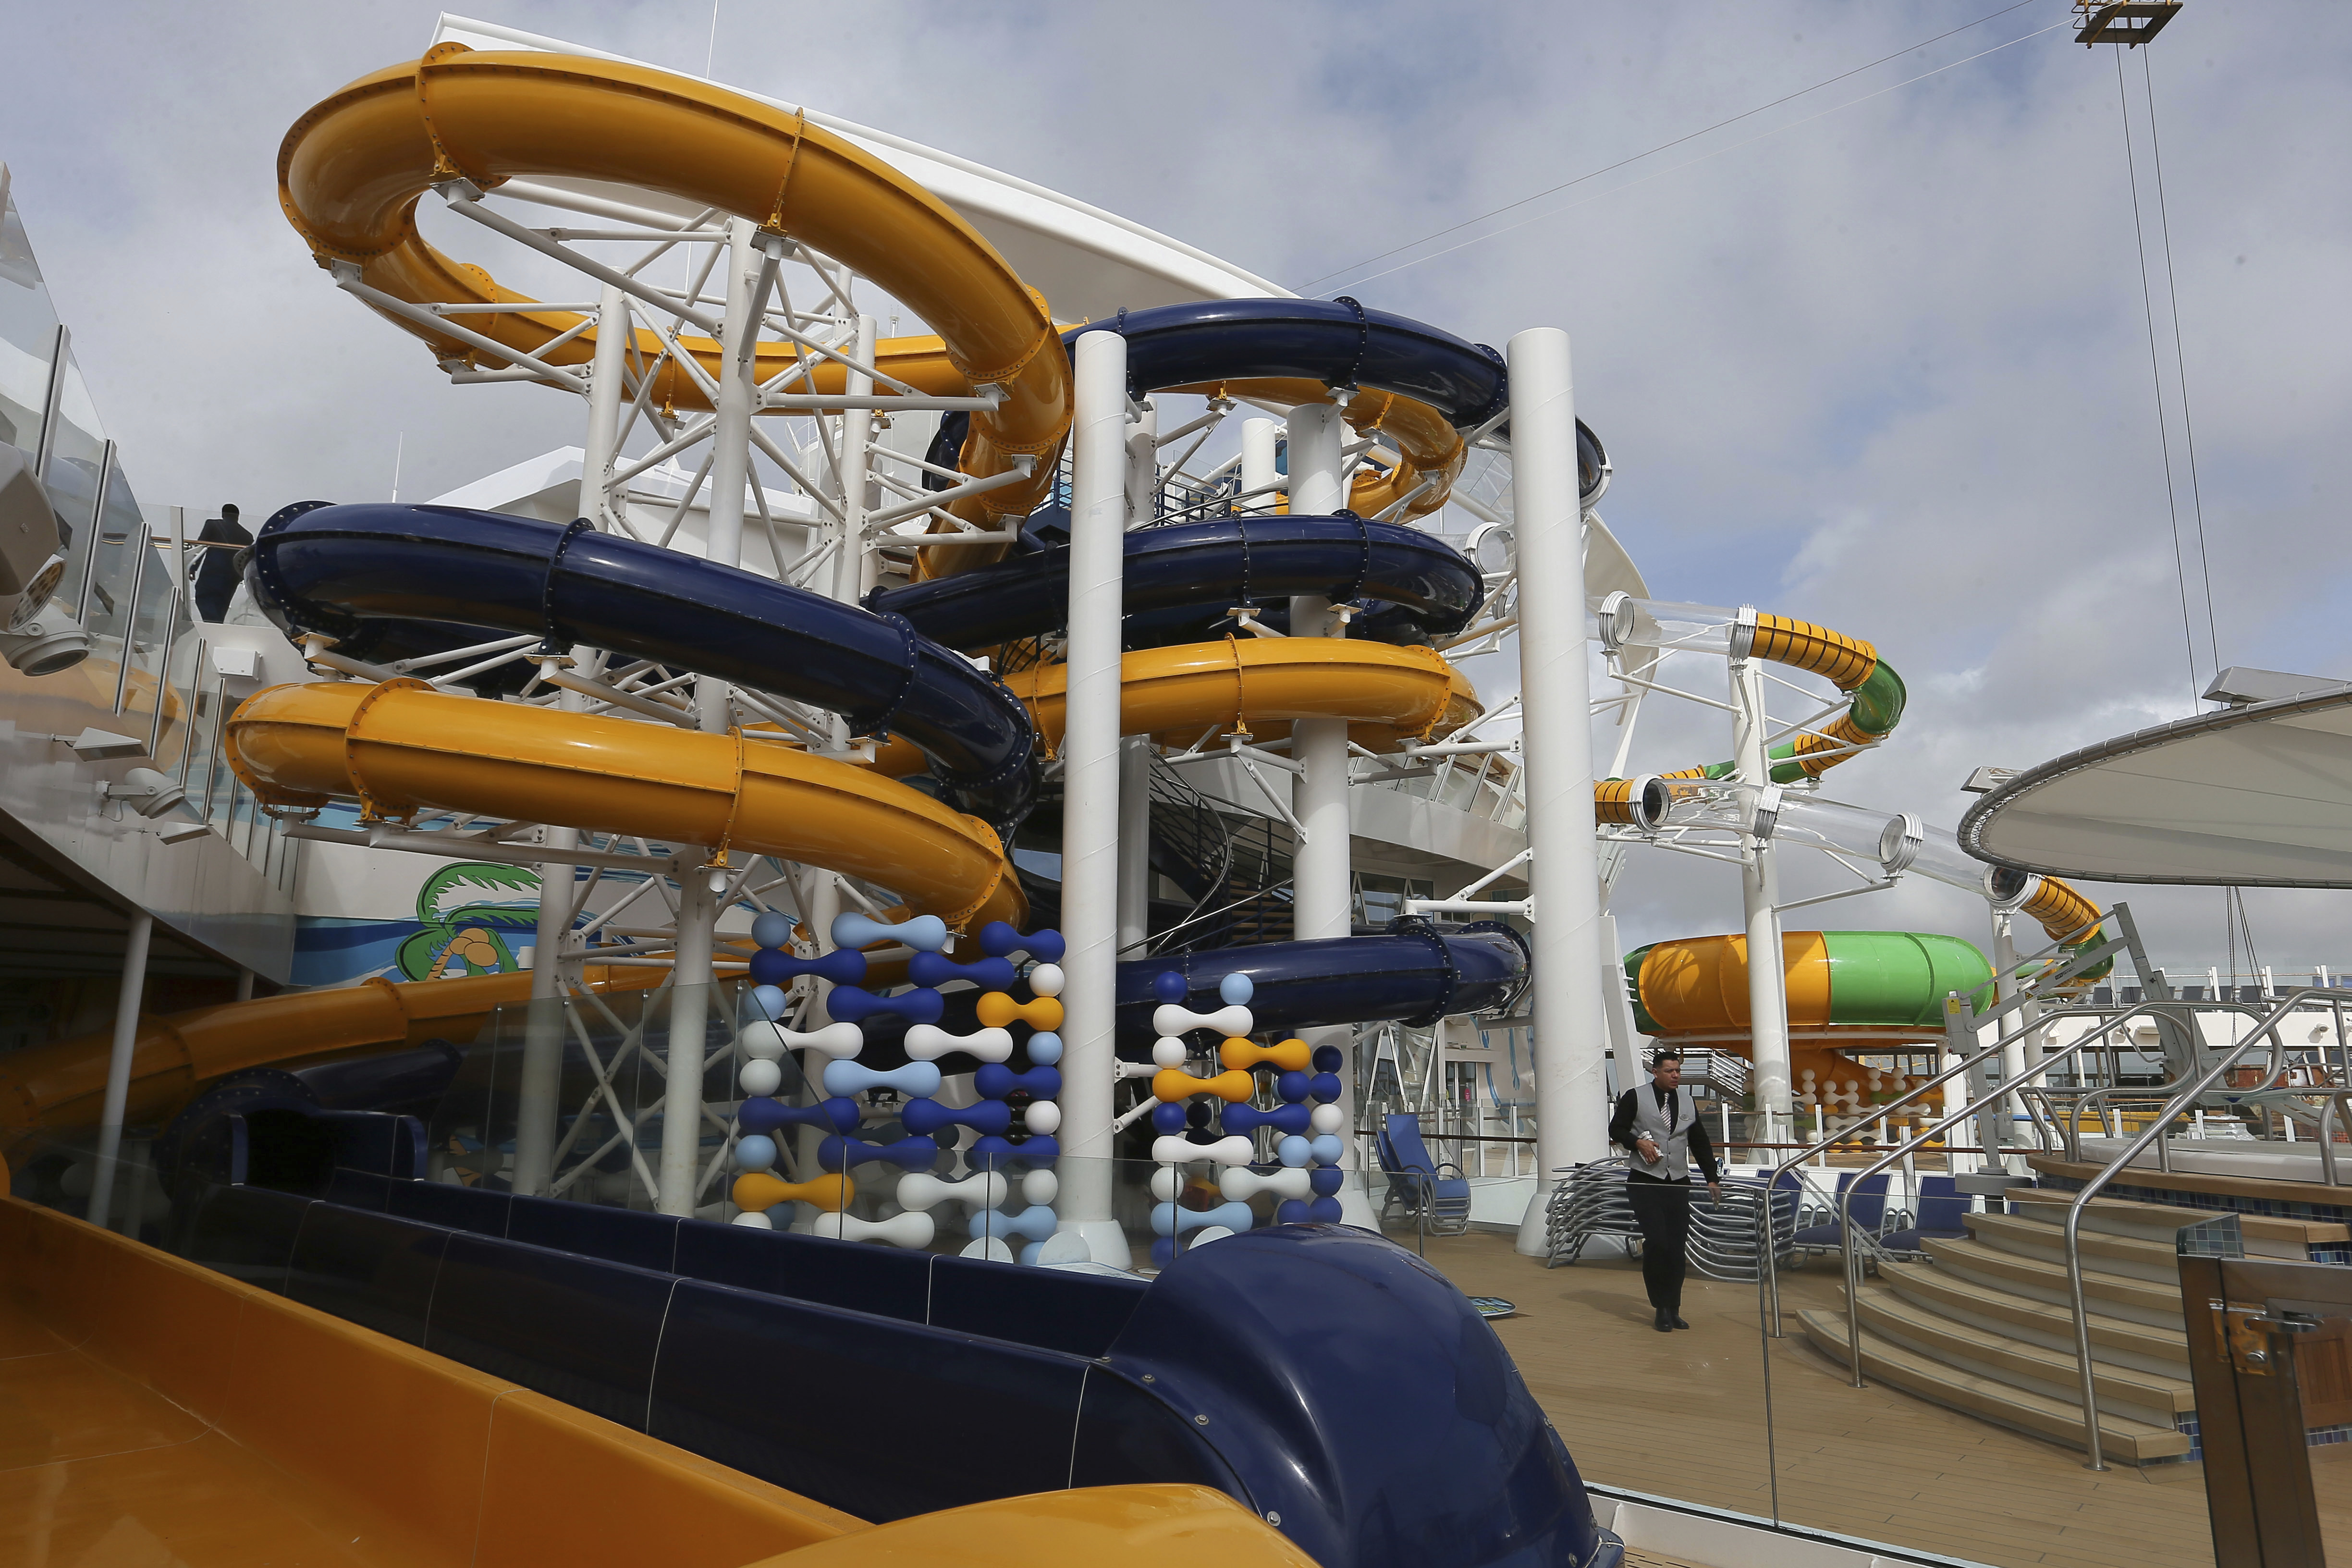 Games at the swimming pool aboard The Symphony of the Seas, the world's largest cruise ship, docking at Saint Nazaire port, western France, Friday, March 23, 2018. Royal Caribbean International took delivery of the much-awaited, 228,081-ton Symphony of the Seas from the French shipyard STX. (AP Photo/David Vincent)